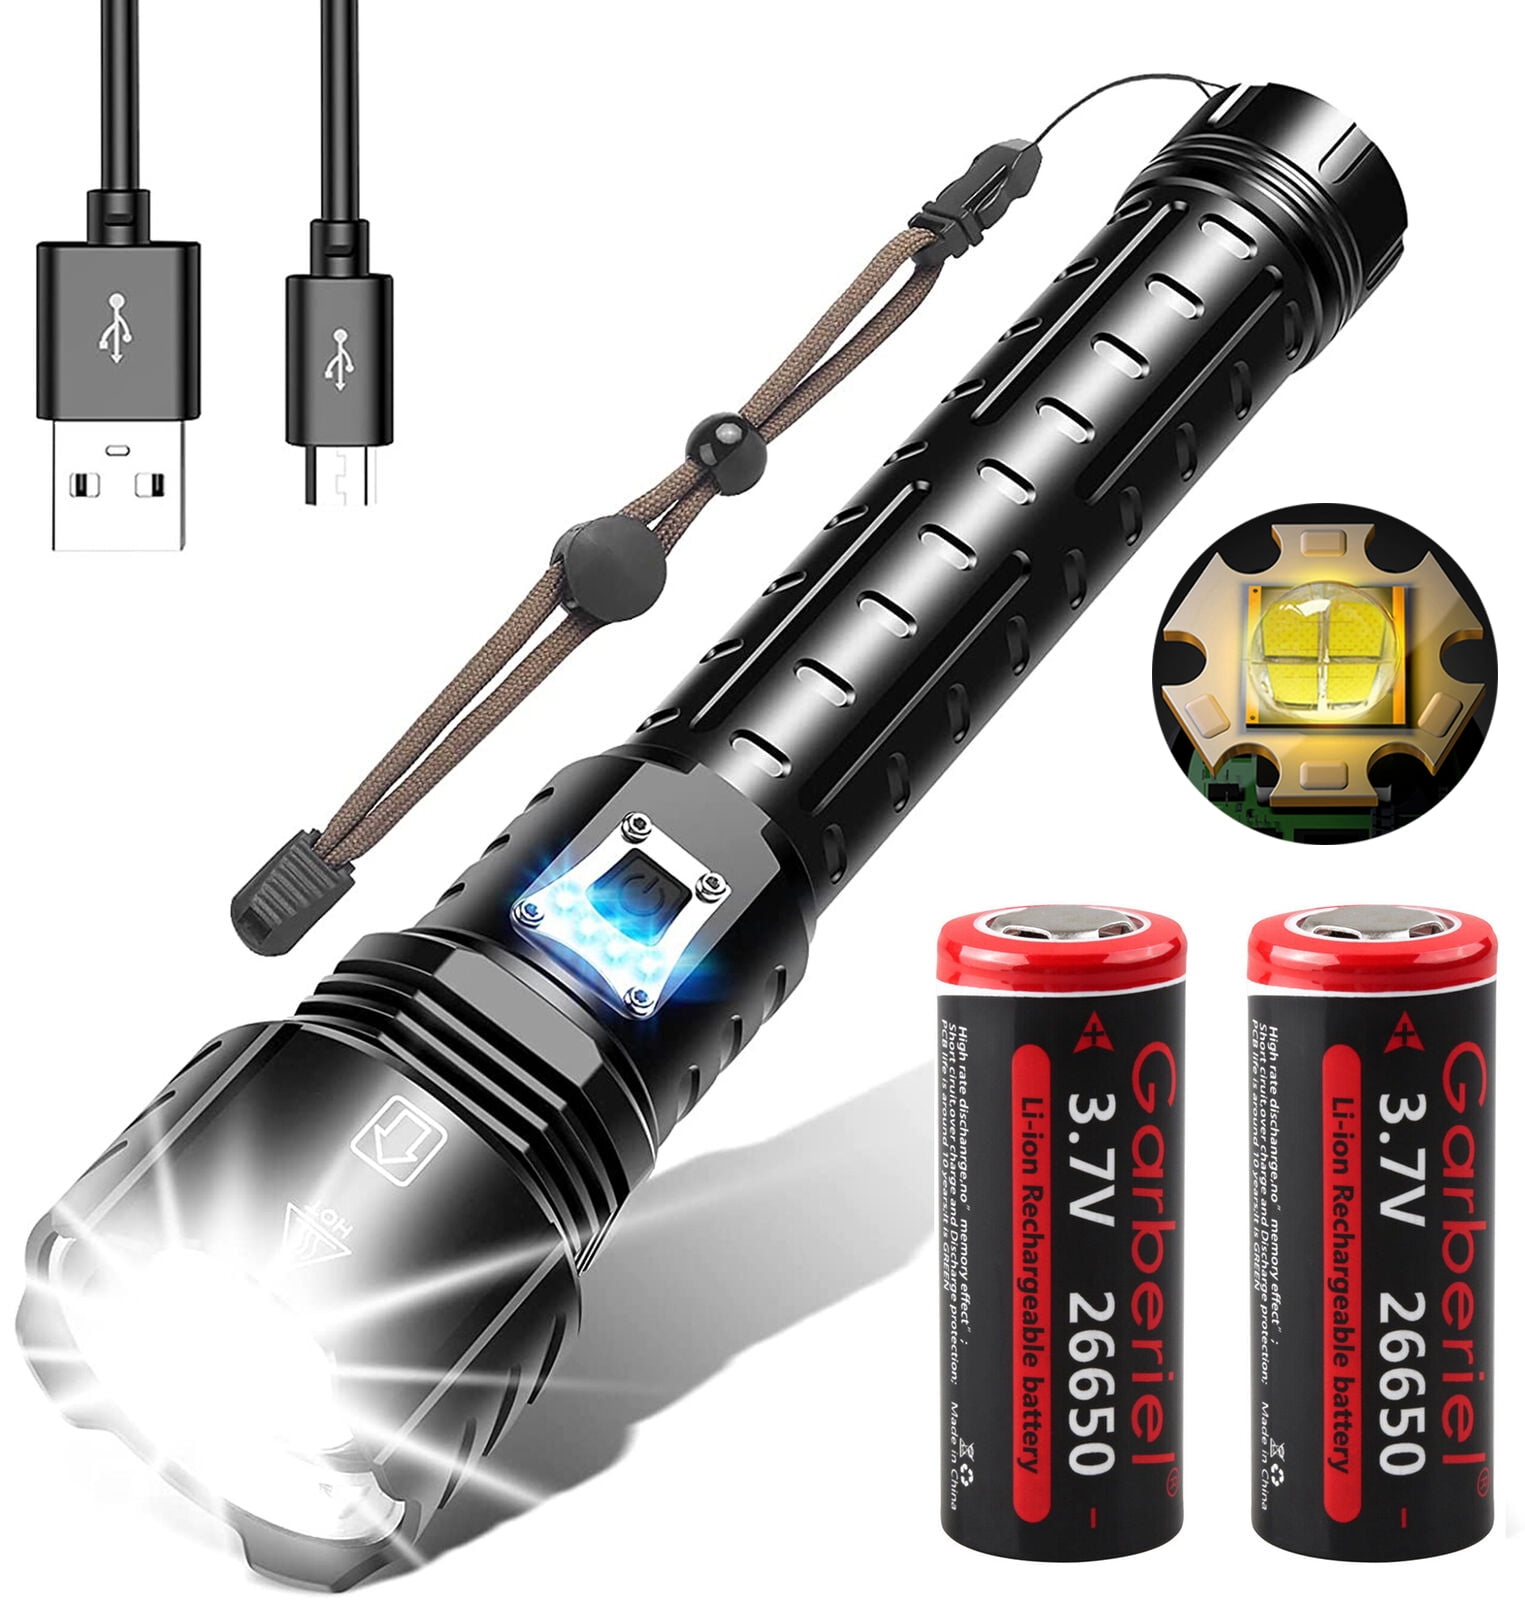 Zoom Hiking Tactical Flashlight Bright Batteries 2PCS with Waterproof LED for USB XHP90.2 26650 Super Camping Torch Rechargeable Garberiel 120000Lumens